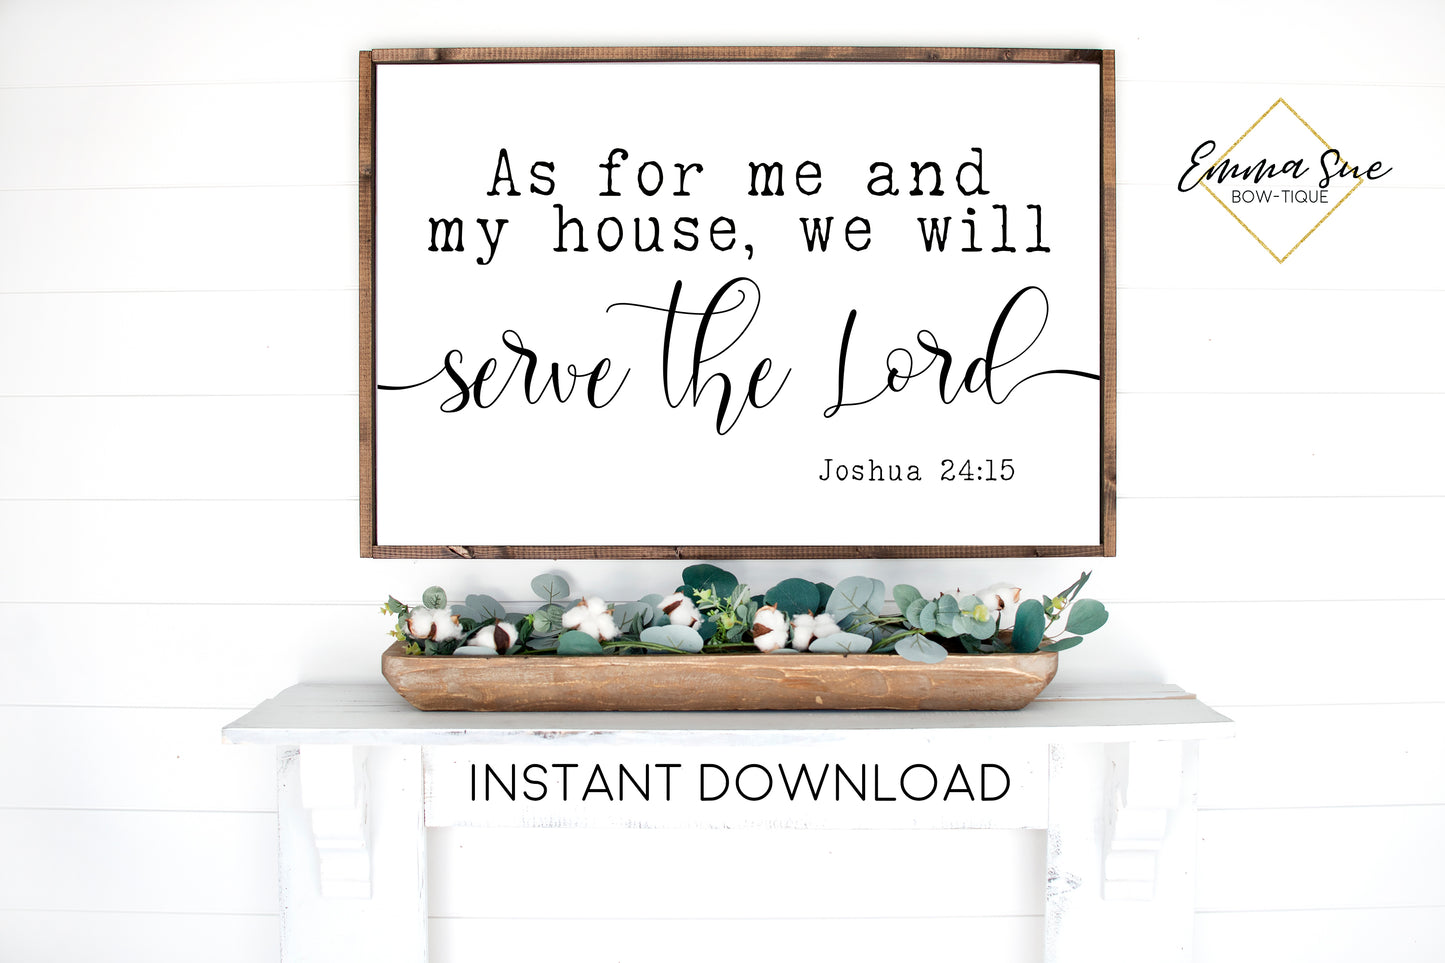 As for me and my house we will serve the Lord - Joshua 24:15 Bible Verse Printable Sign Wall Art - Instant Download